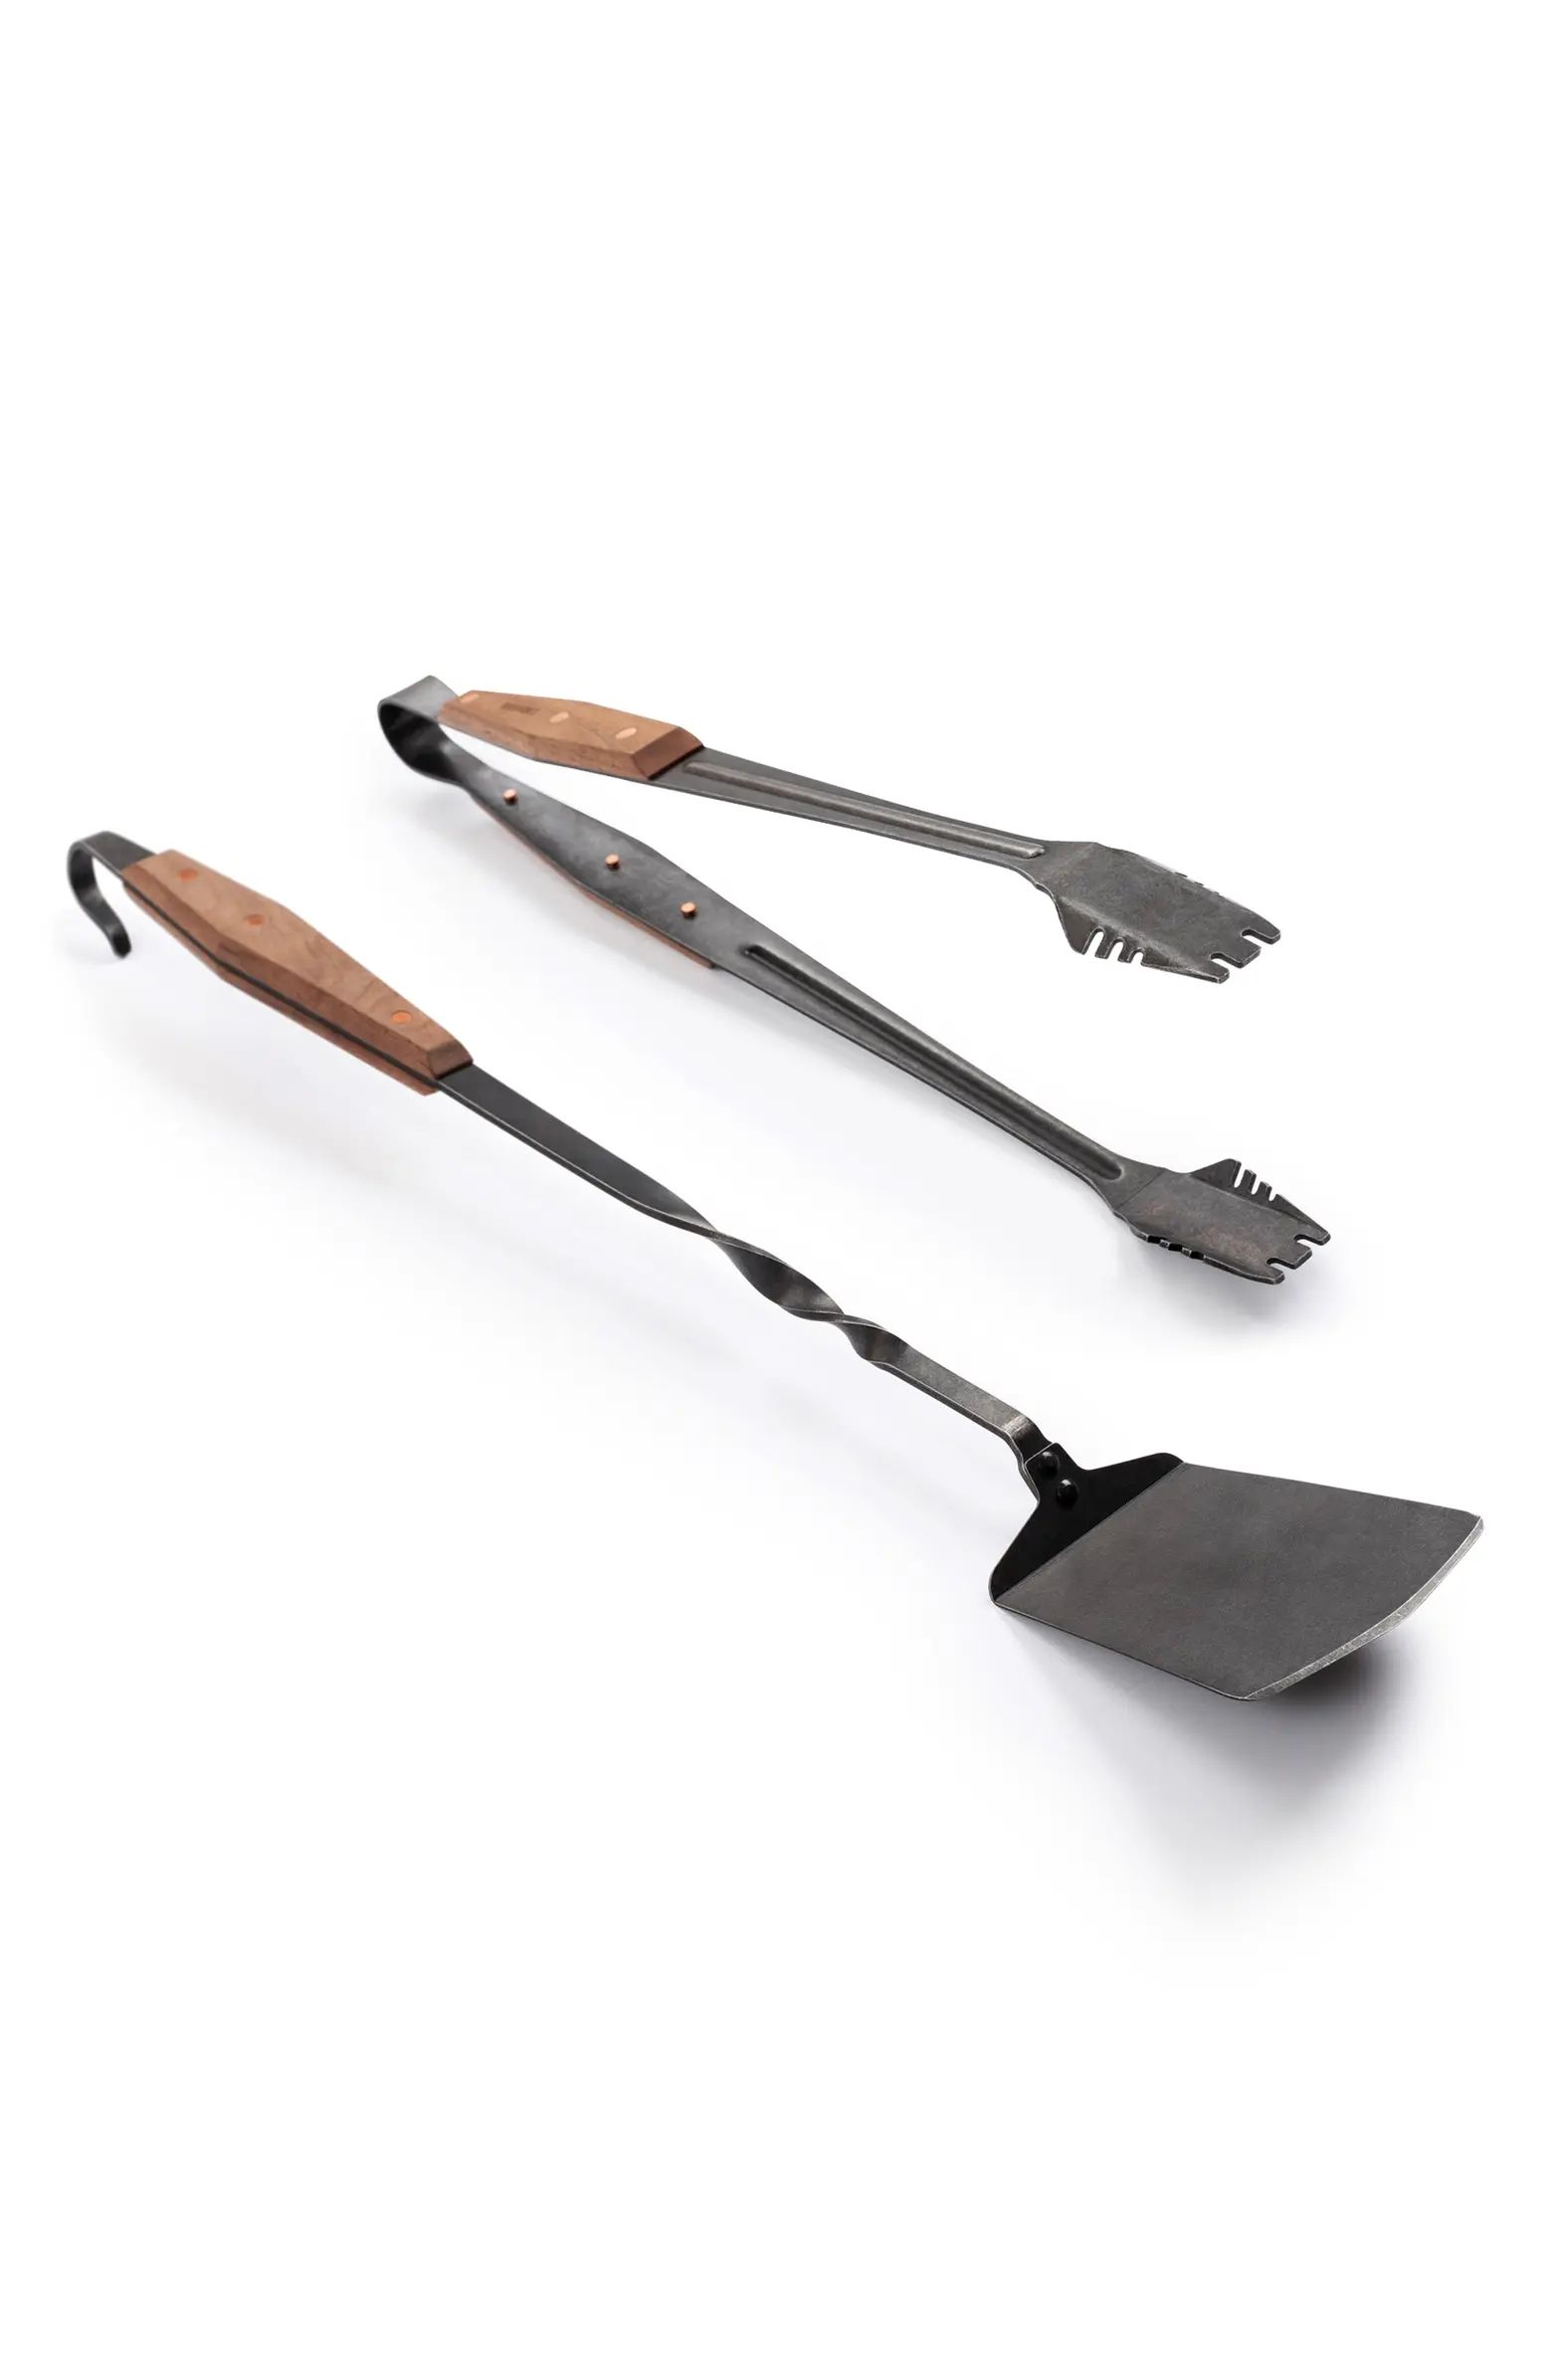 2-Piece Barbeque Grilling Tools | Nordstrom